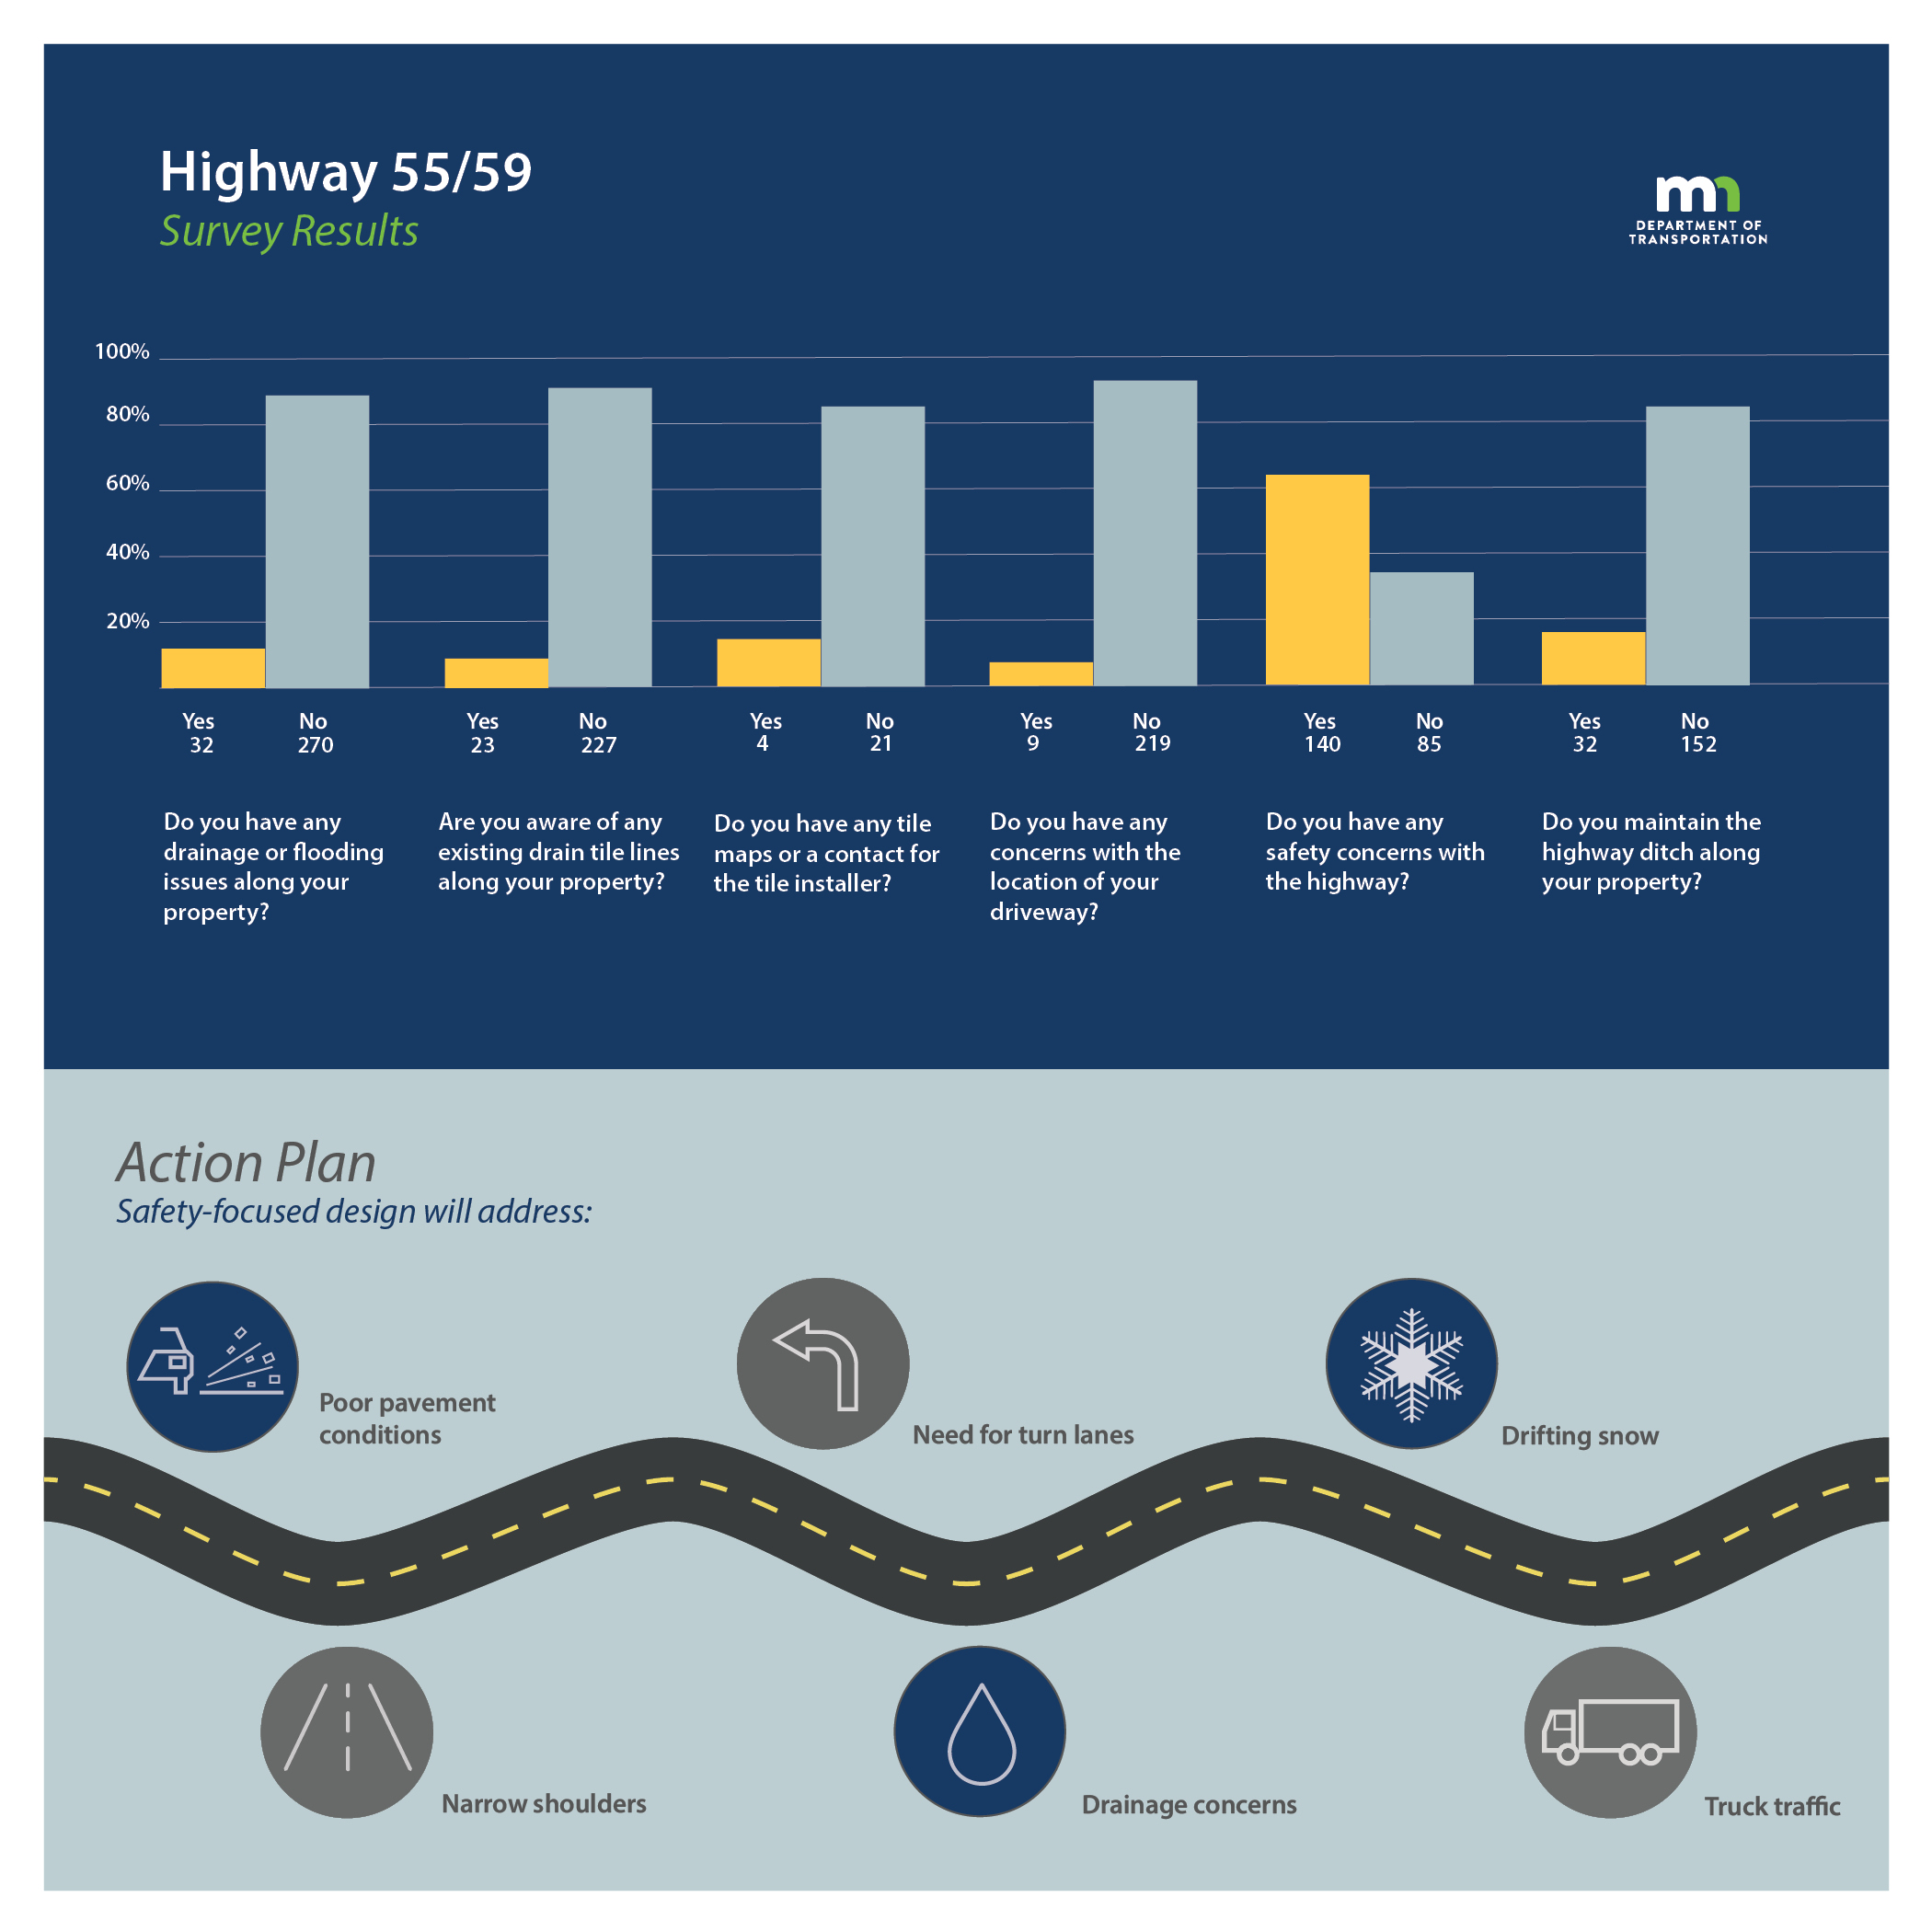 Graphic shows the Highway 55/59 survey results. It also shows the action plan for the safety-focused highway design that will address issues mentioned by survey respondents.